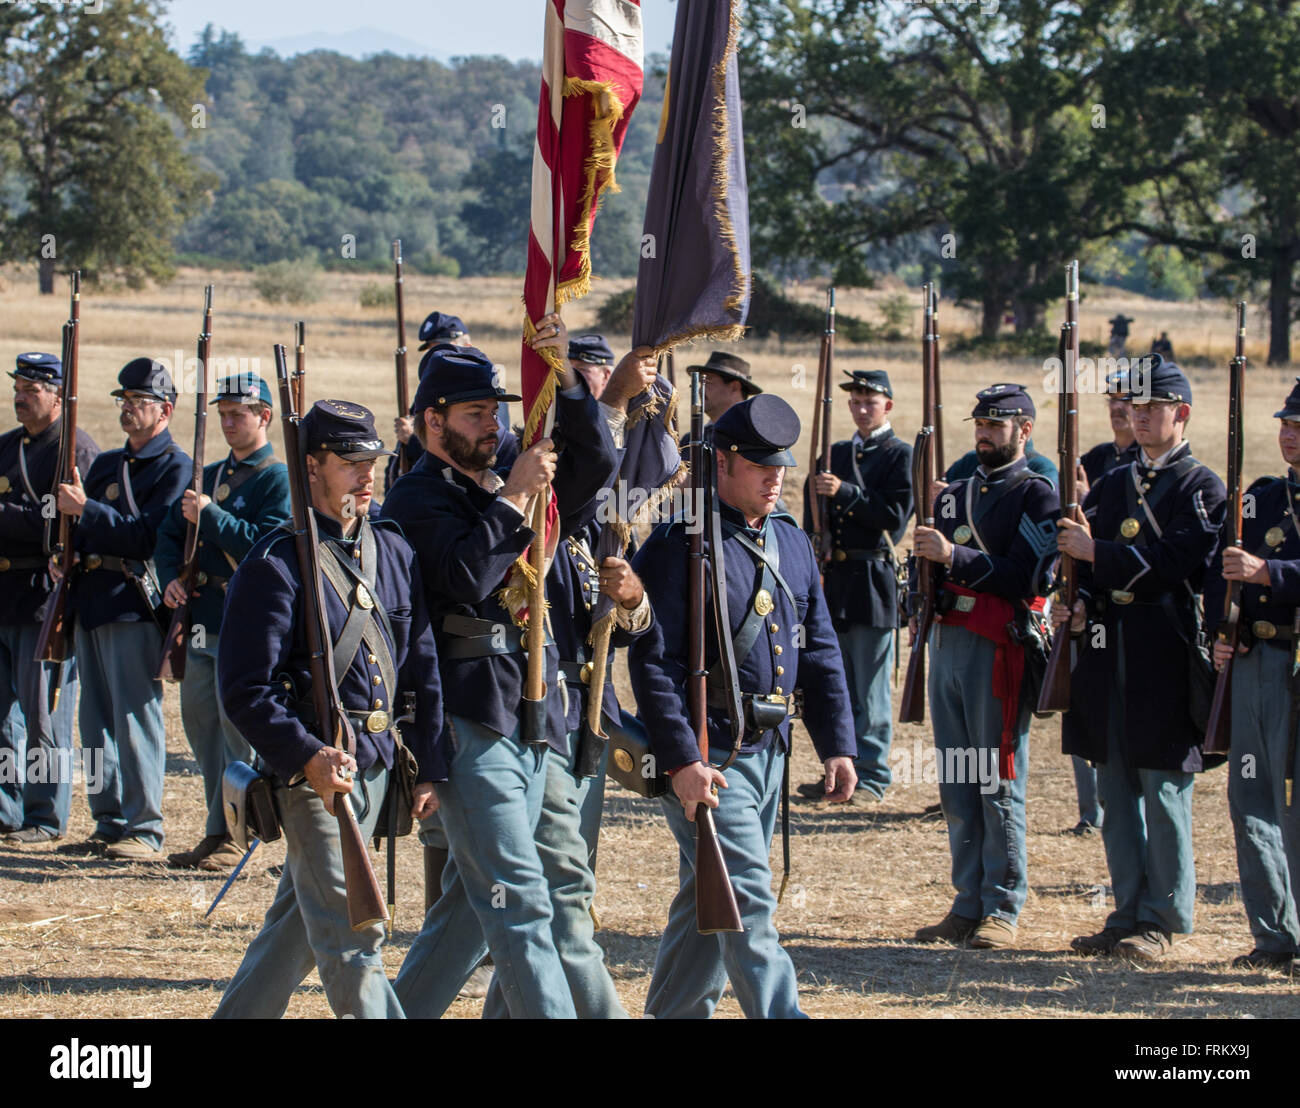 Union Soldiers at an American Civil War Reenactment at Hawes Farm, Anderson, California. Stock Photo